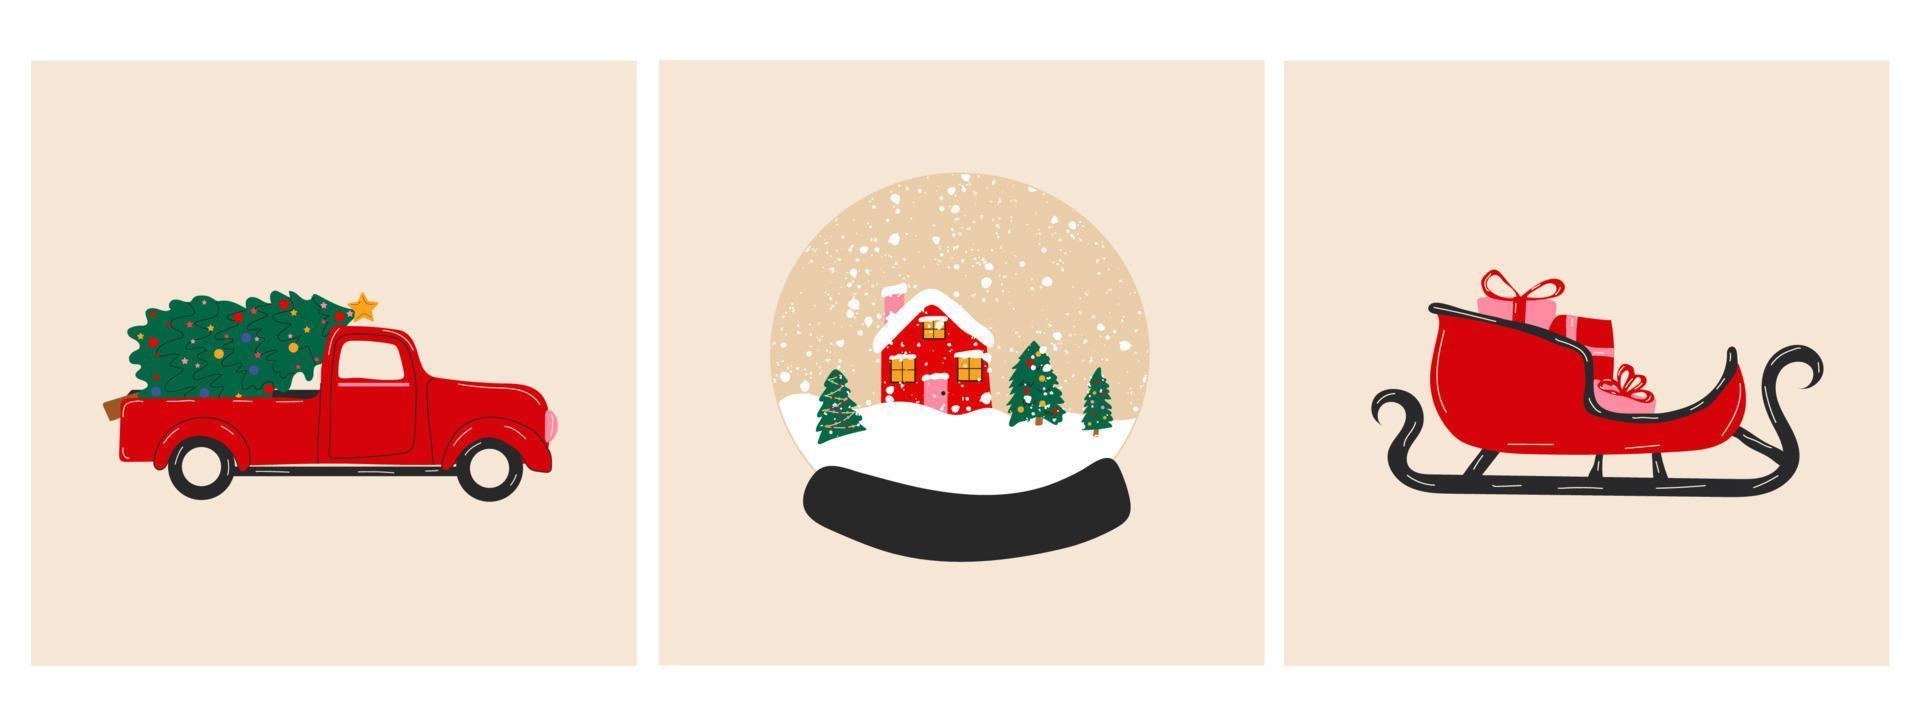 Set of three Christmas objects, snow globe, sleigh and pickup truck with christmas tree.Vector in cartoon style. All elements are isolated vector